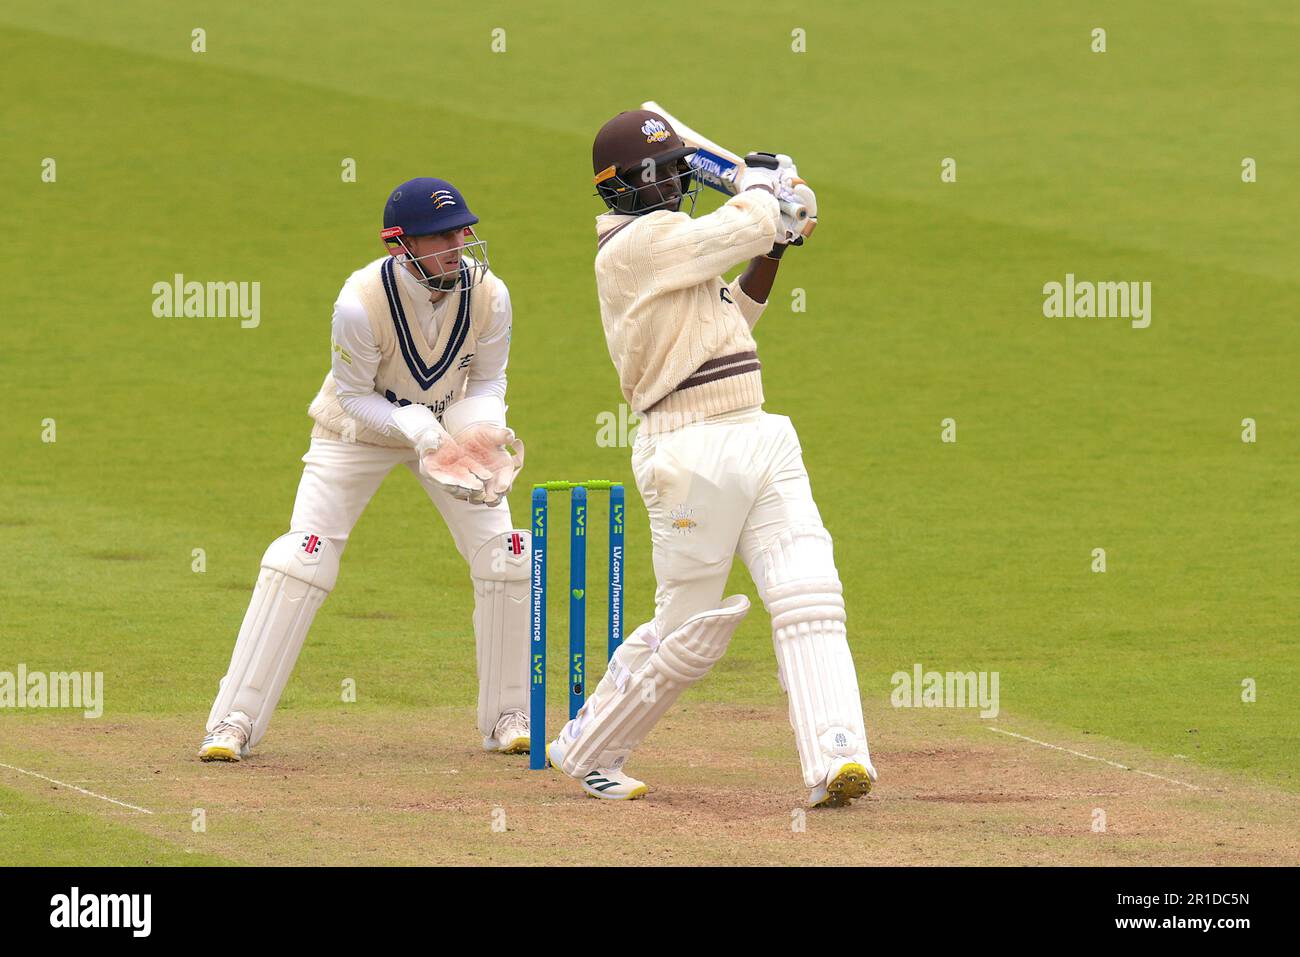 London, UK. 13 May, 2023. London, UK. Surrey’s Kemar Roach batting as Surrey take on Middlesex in the County Championship at the Kia Oval, day three David Rowe/Alamy Live News Credit: David Rowe/Alamy Live News Stock Photo